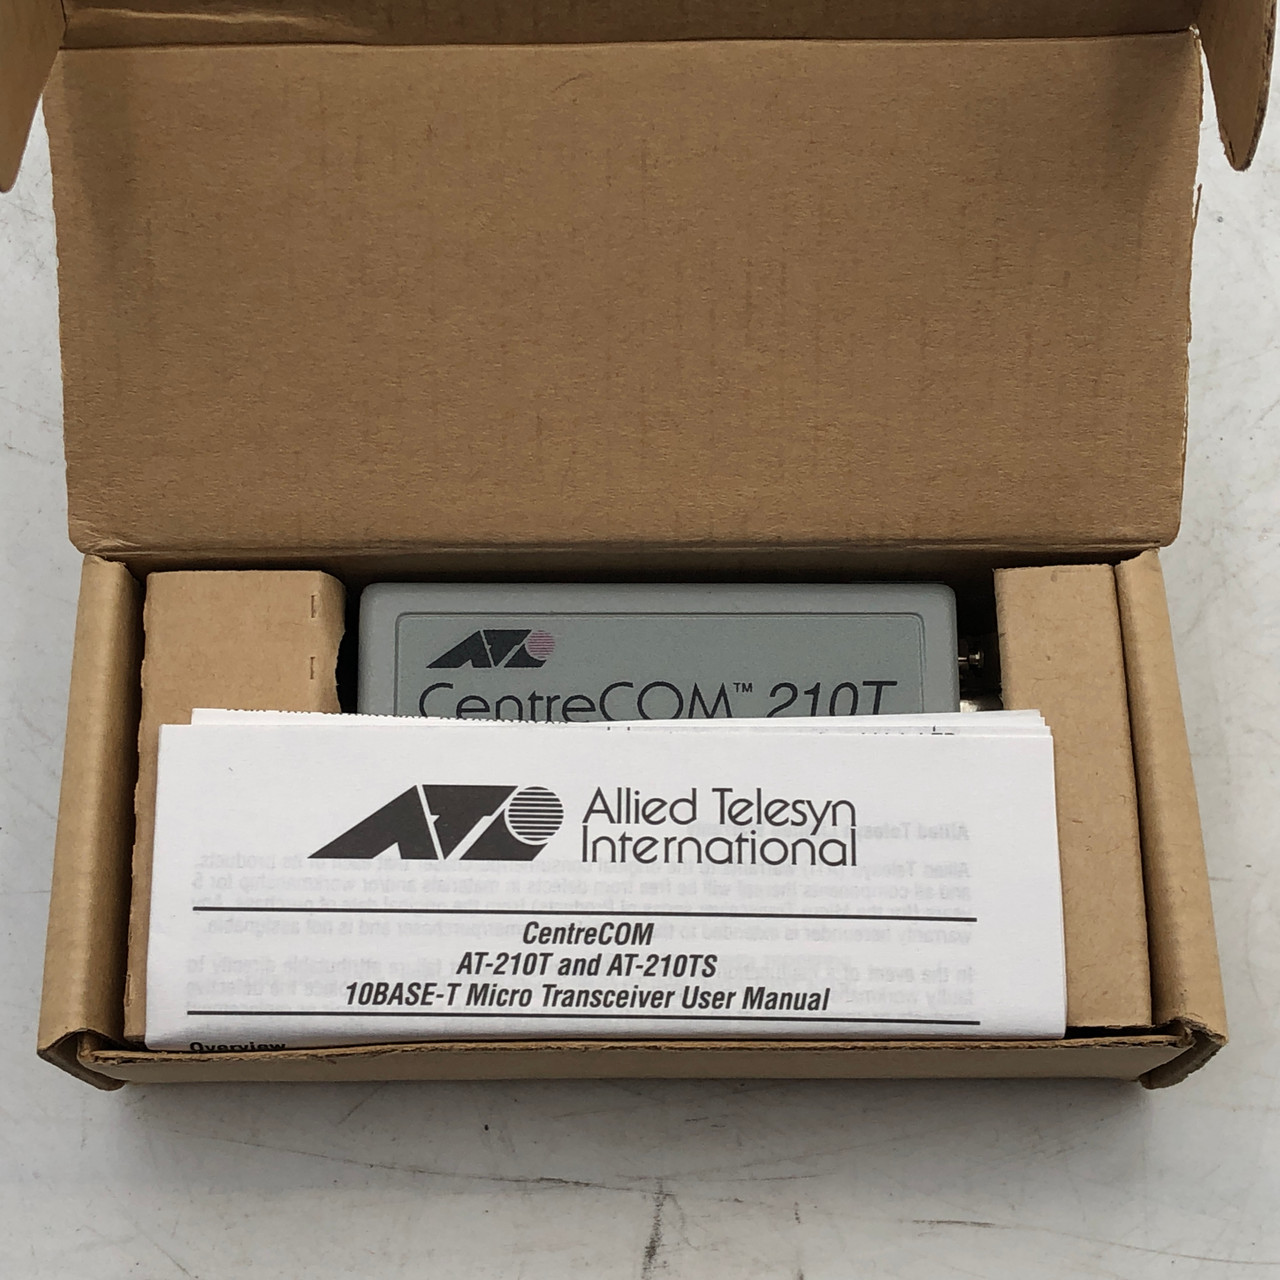 ALLIED TELESIS 210T CENTRECOM IEEE 802.3 12VDC TWISTED PAIR TRANCEIVER - NEW